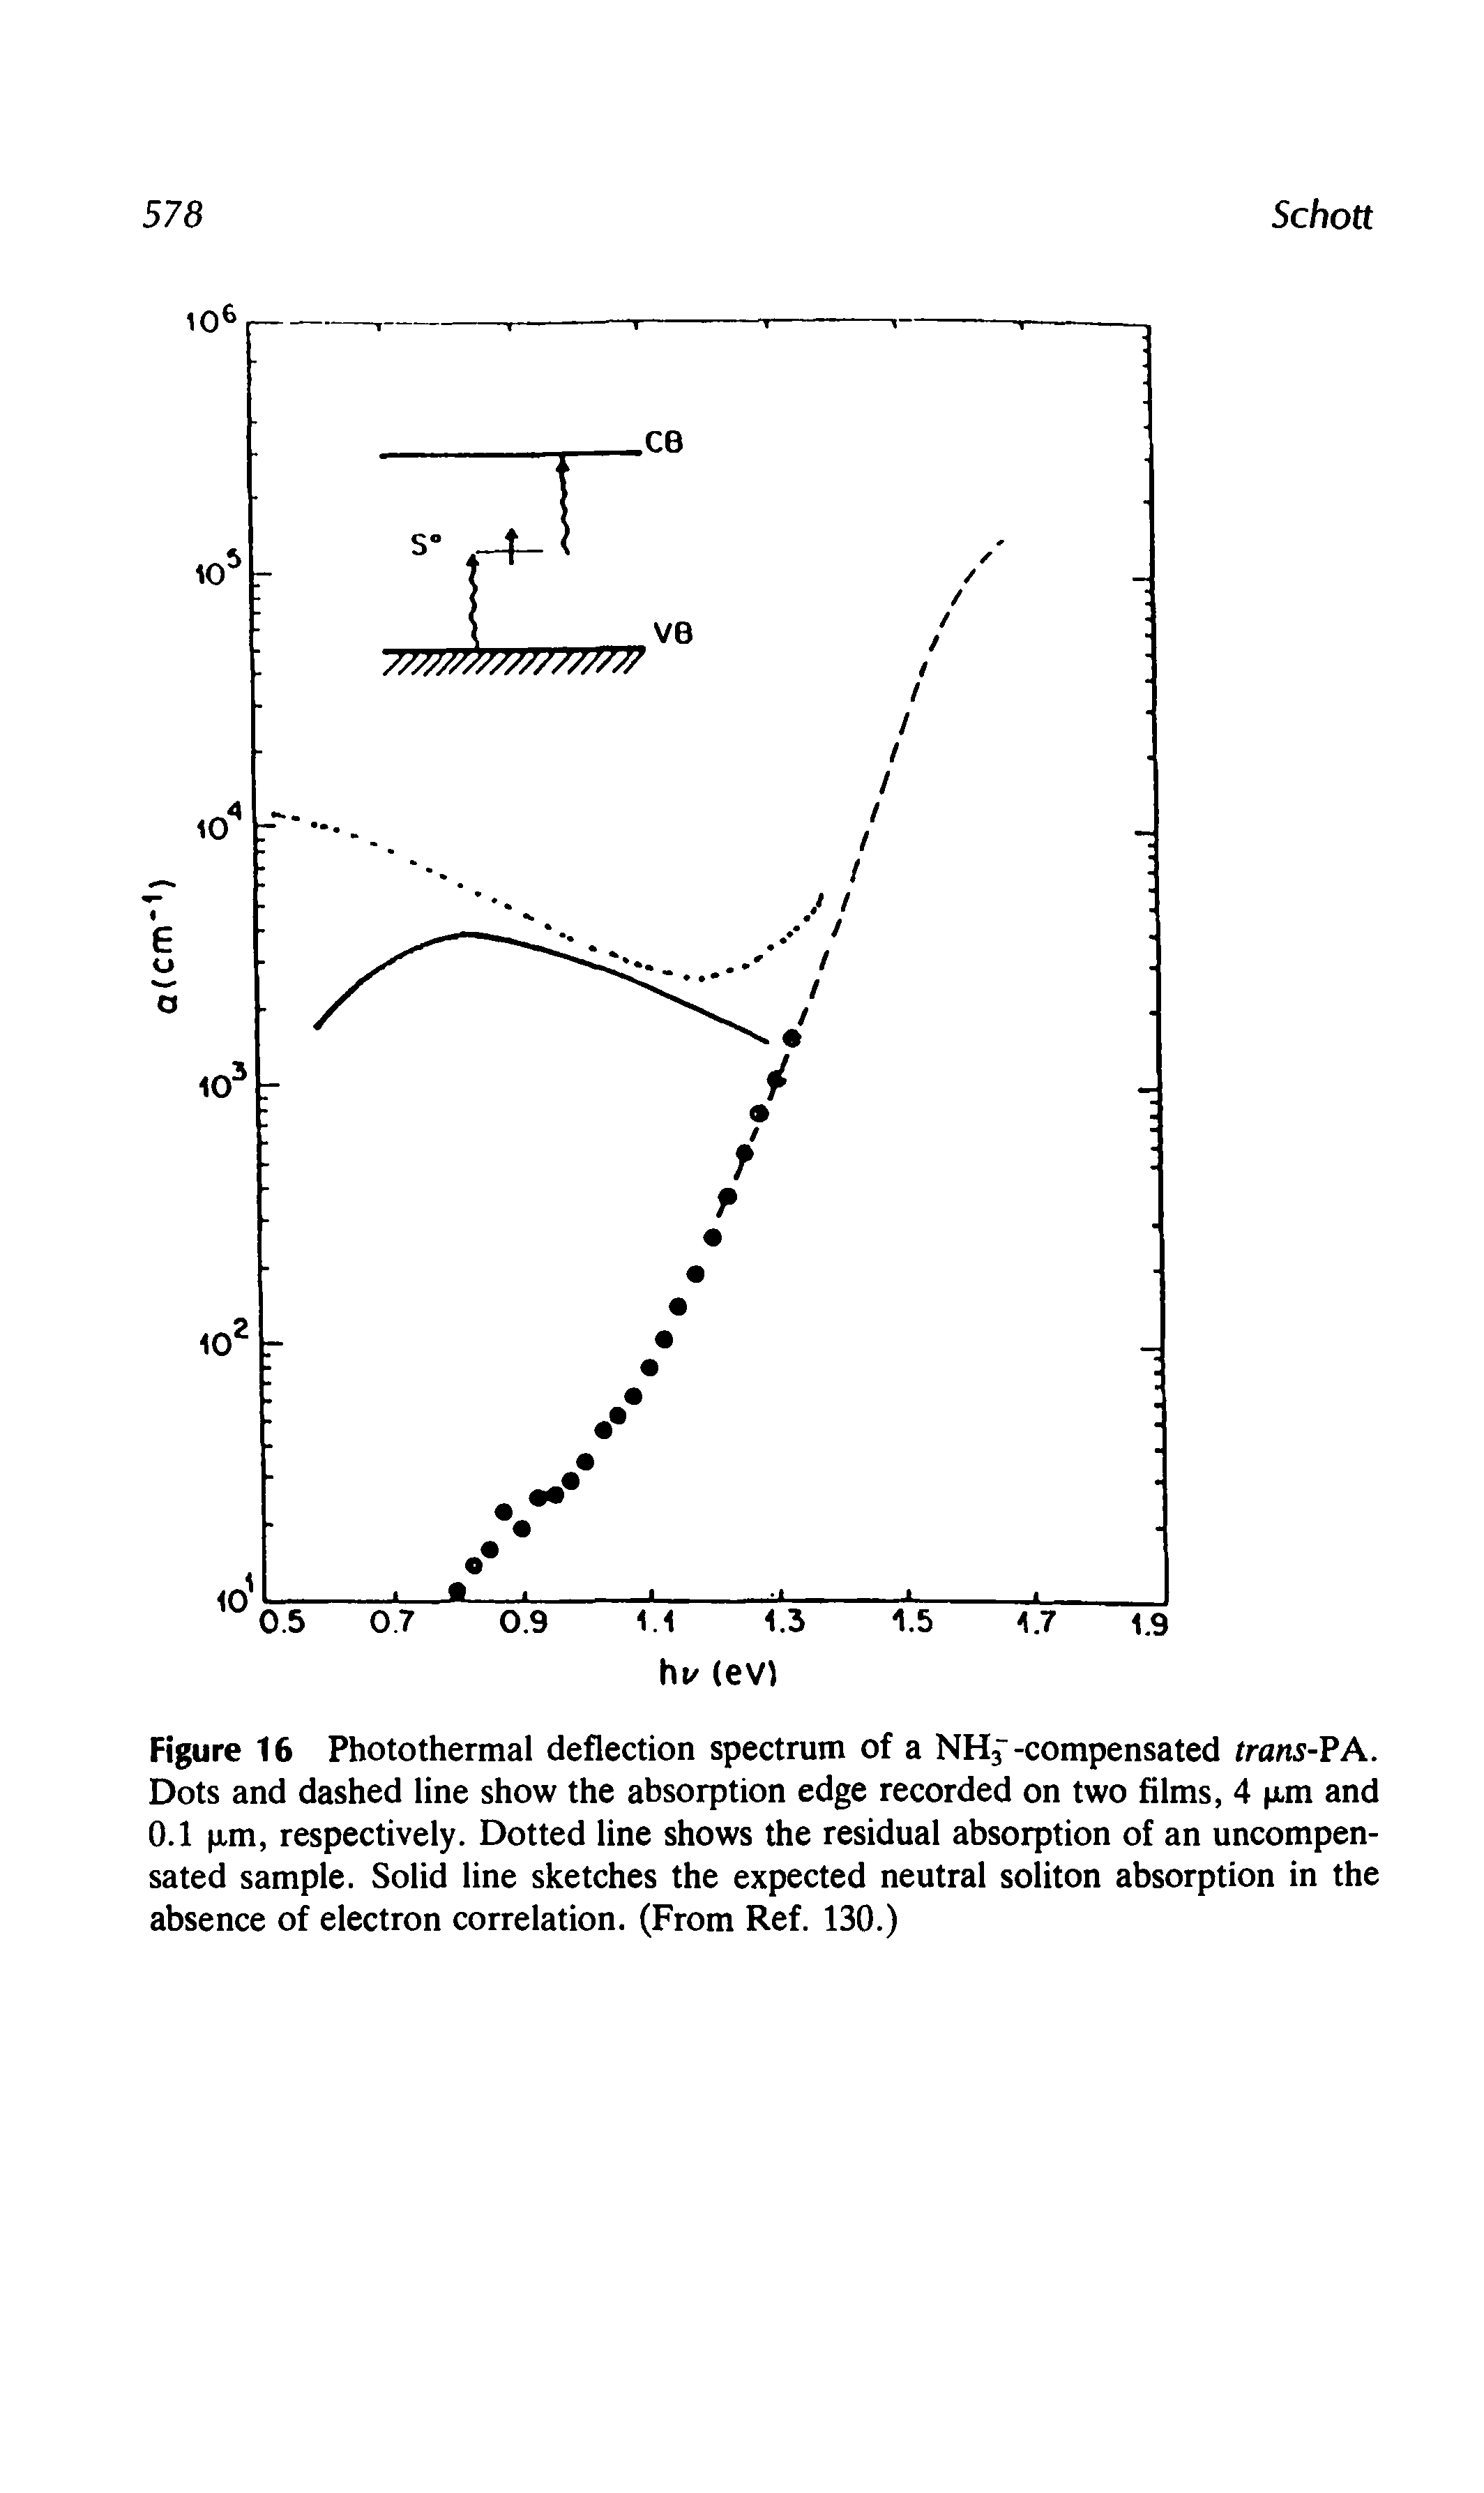 Figure 16 Photothermal deflection spectrum of a NH3 -compensated trans-VA. Dots and dashed line show the absorption edge recorded on two films, 4 p.m and 0.1 xm, respectively. Dotted line shows the residual absorption of an uncompensated sample. Solid line sketches the expected neutral soliton absorption in the absence of electron correlation. (From Ref. 130.)...